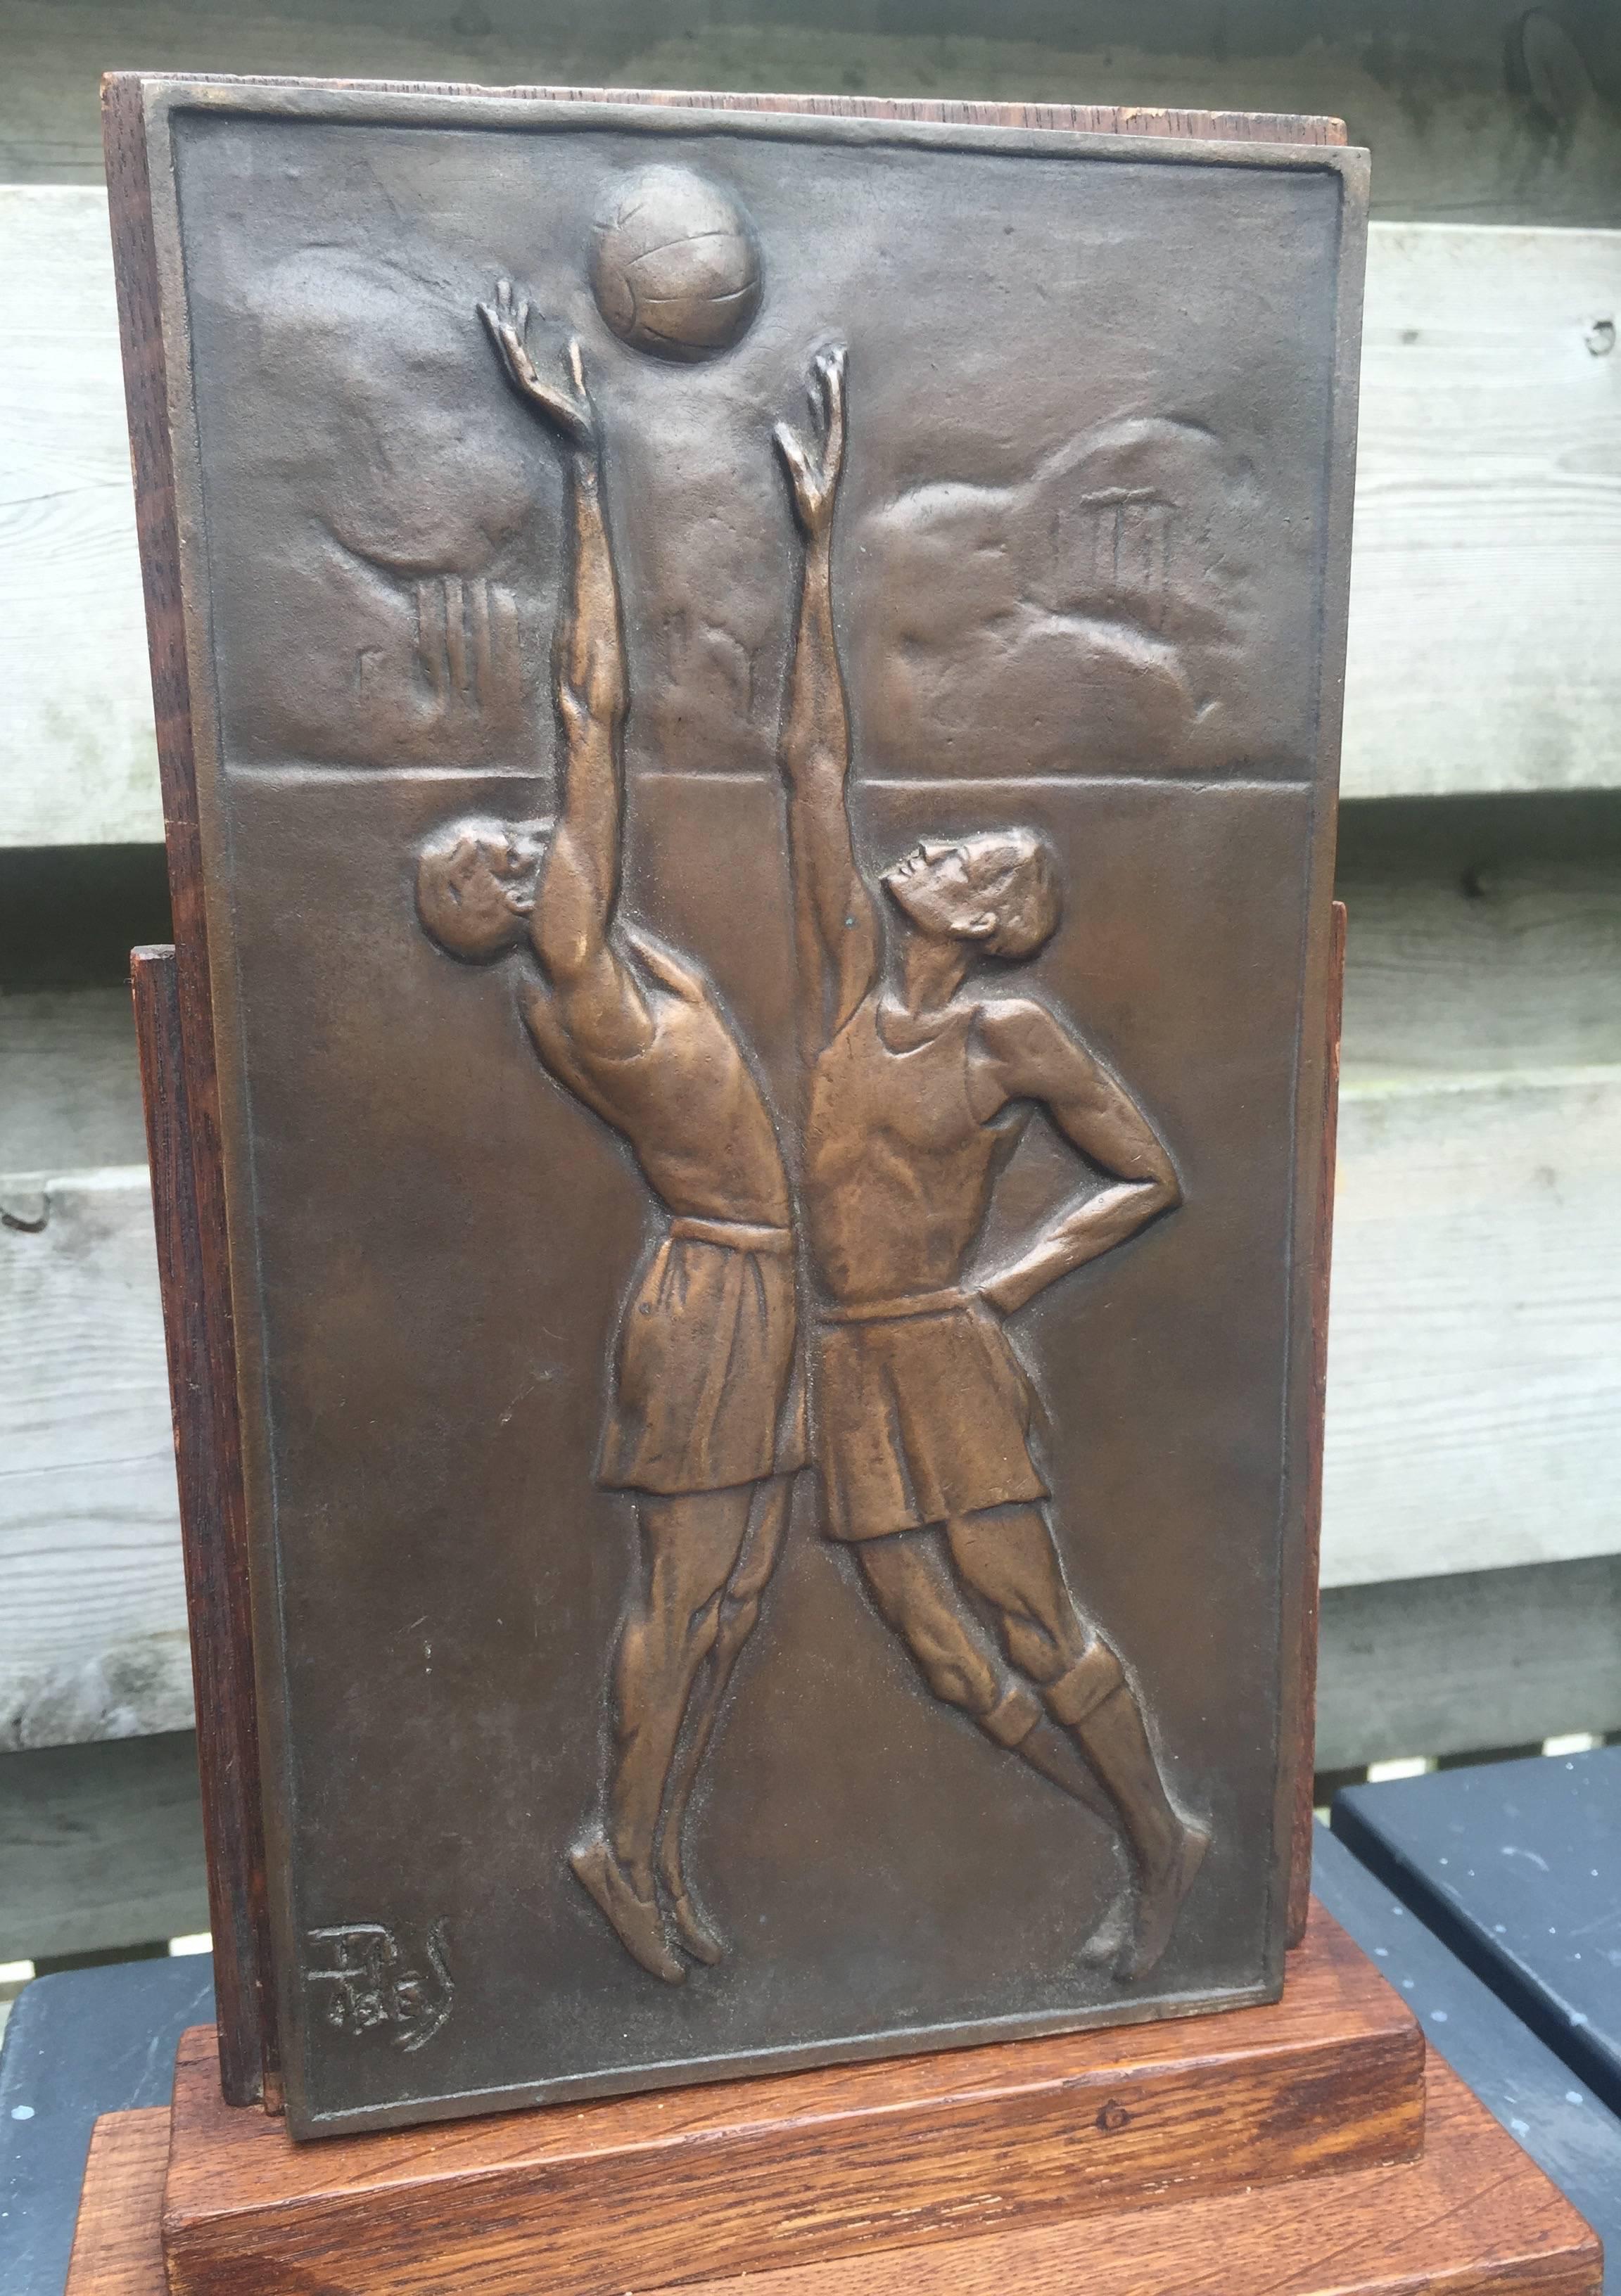 Sports related and rare Art Deco desk piece. 

Sports related Art Deco pieces are few and far between. To find one depicting two man playing the grand sport of Basketball again felt like a blessing. The quality of the relief and details of this